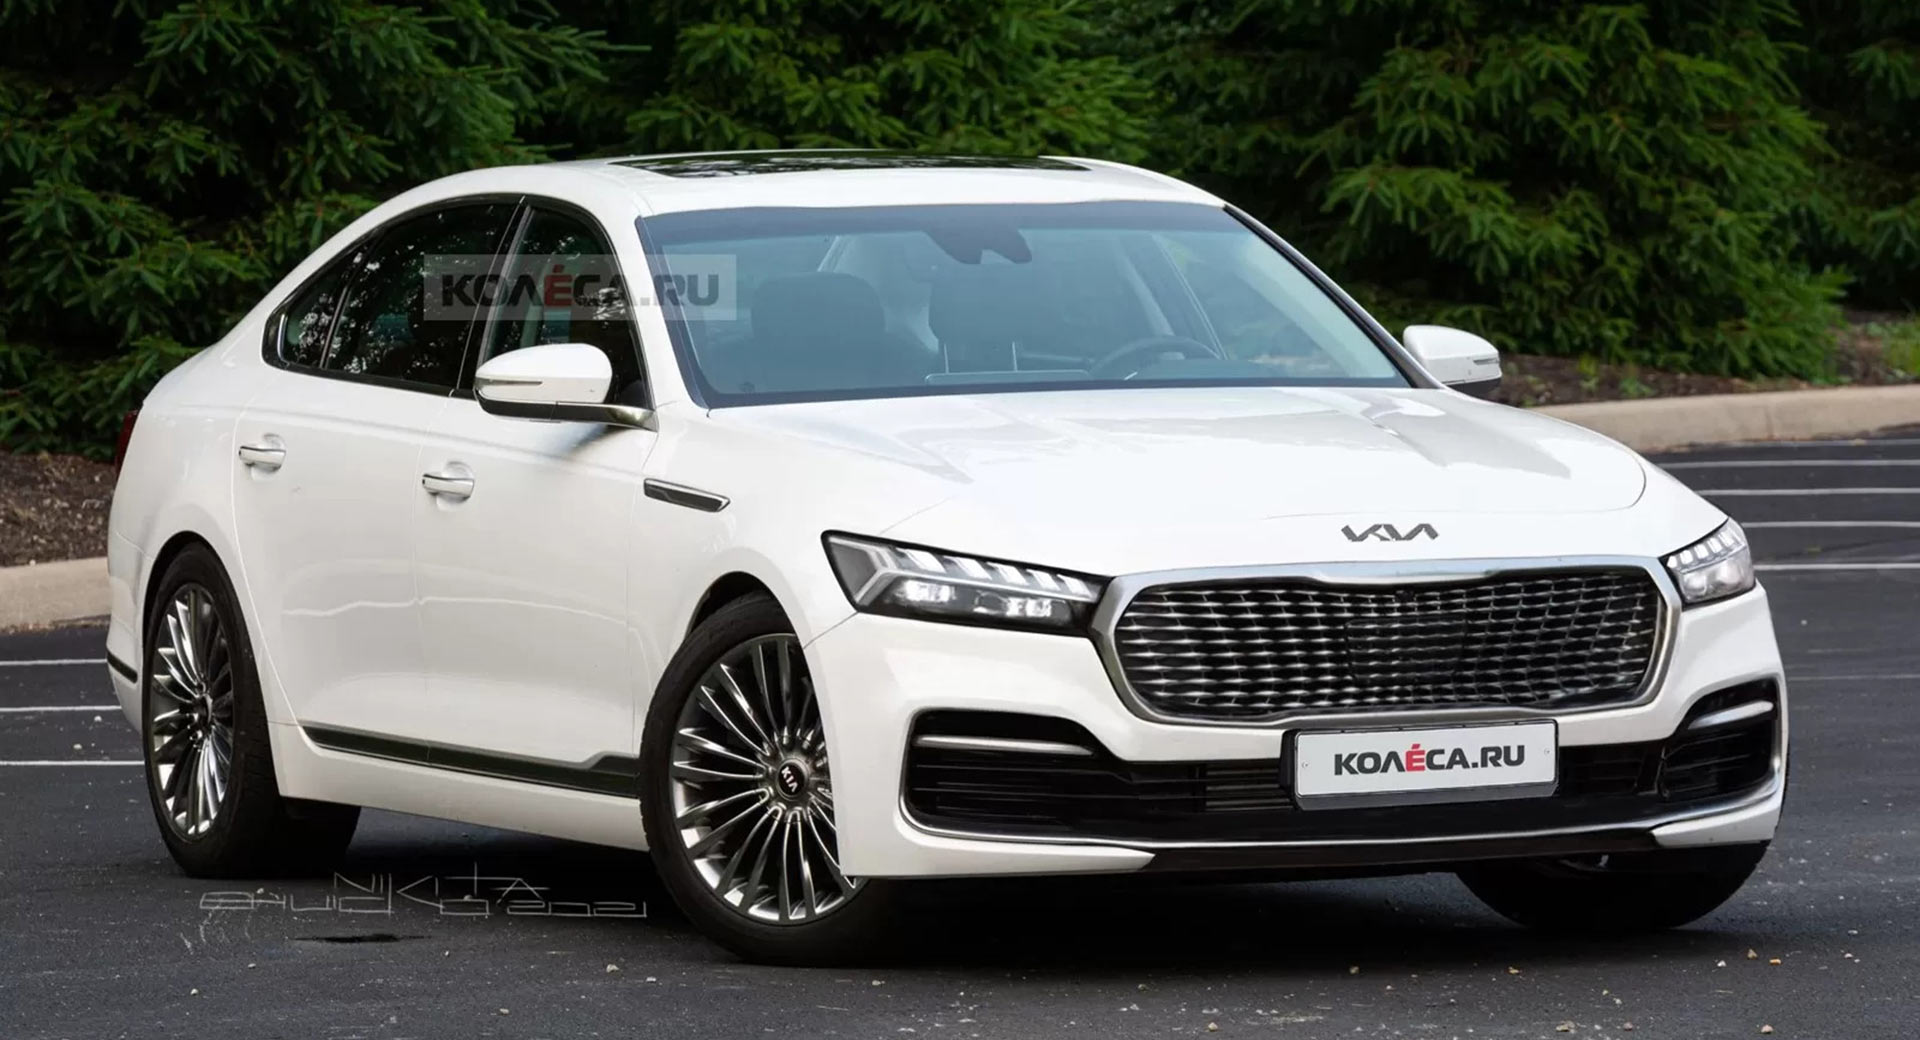 Kia’s K9 / K900 Will Get An Update, And It Could Look Like This | Carscoops